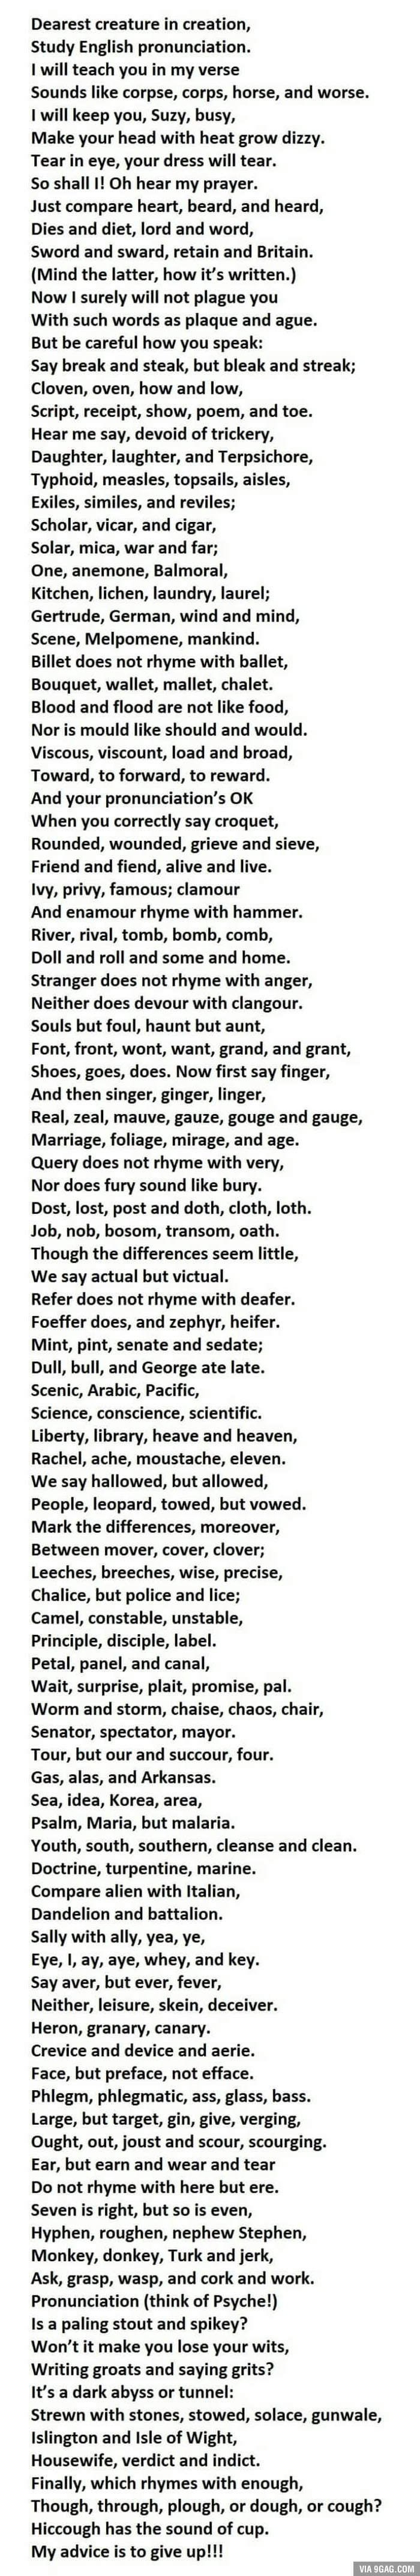 If You Can Pronounce Correctly Every Word In This Poem You Speak